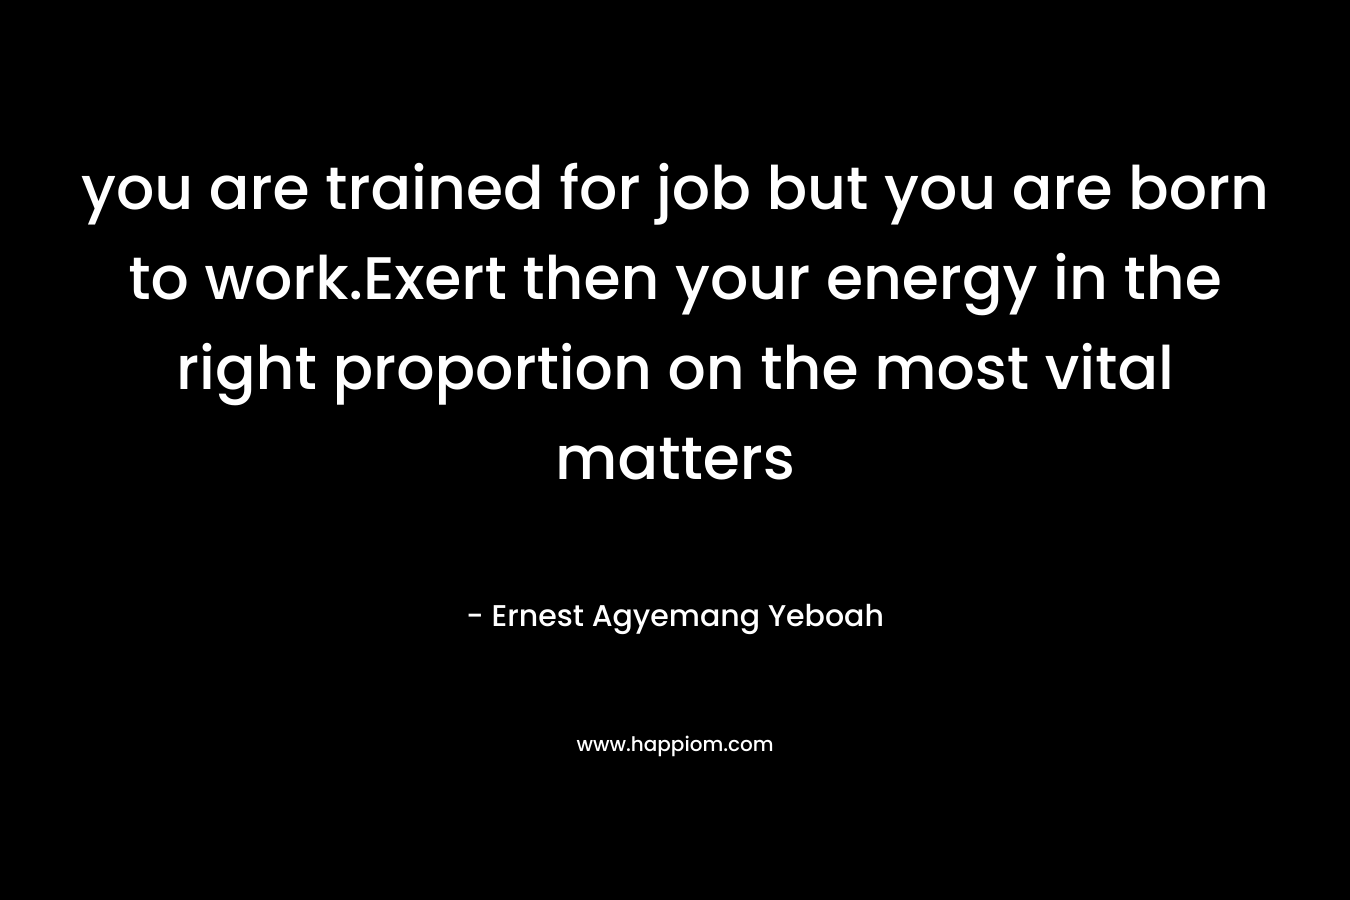 you are trained for job but you are born to work.Exert then your energy in the right proportion on the most vital matters